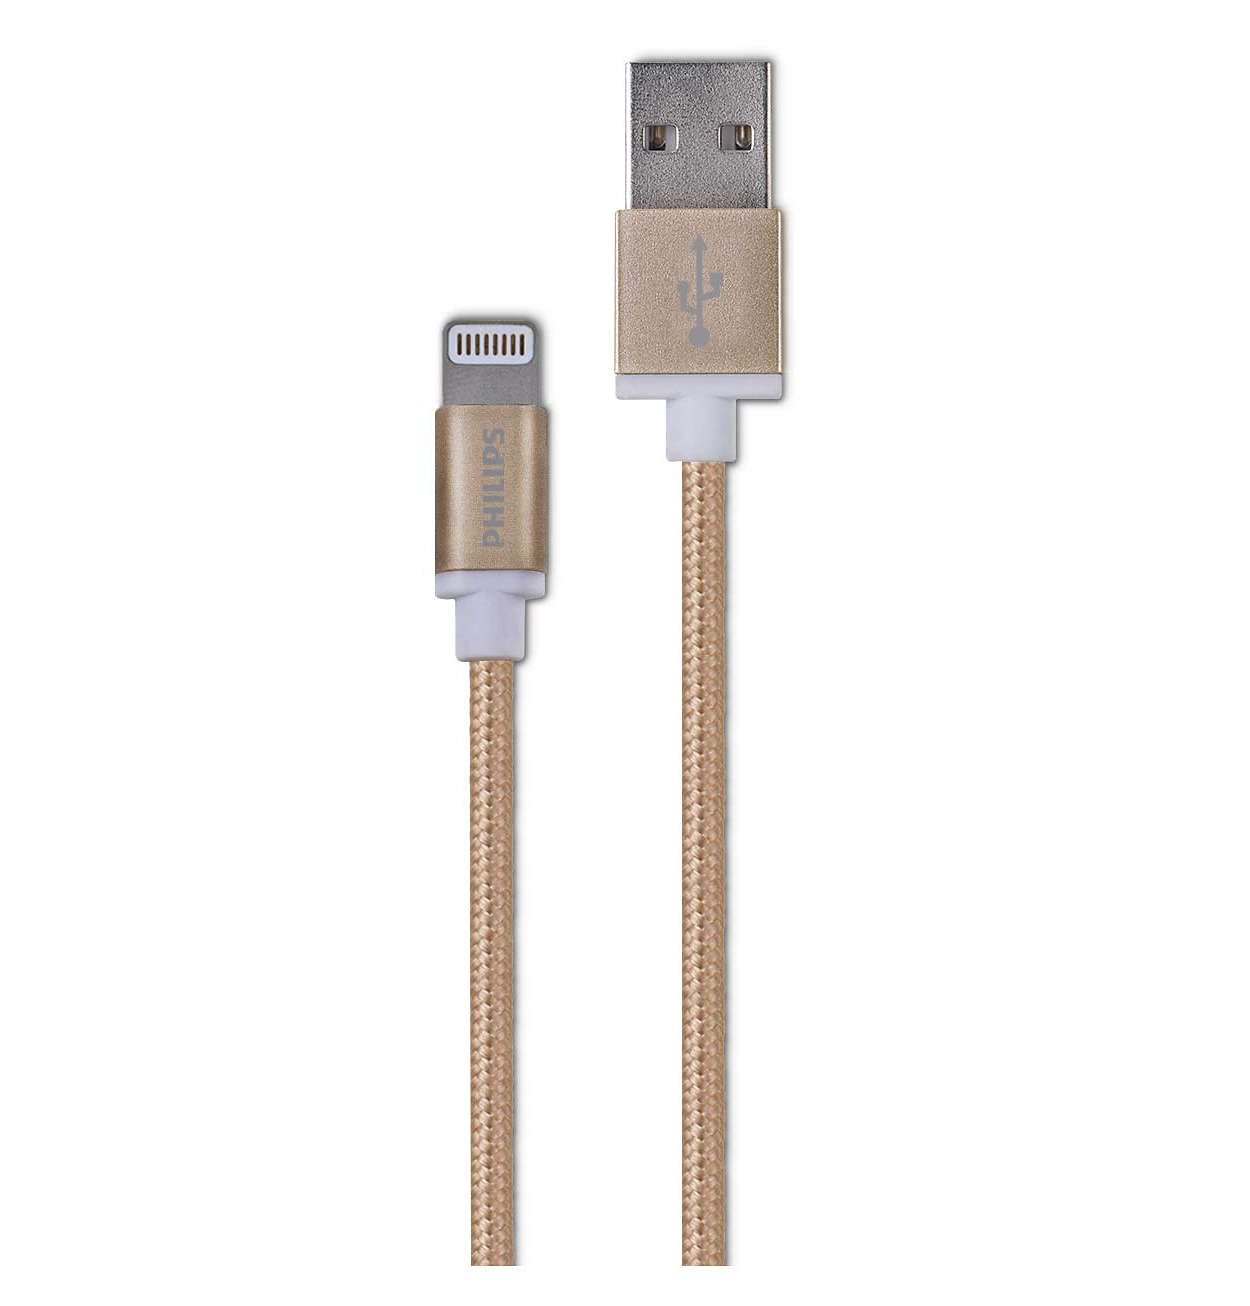 1.2 m iPhone Lightning to USB cable